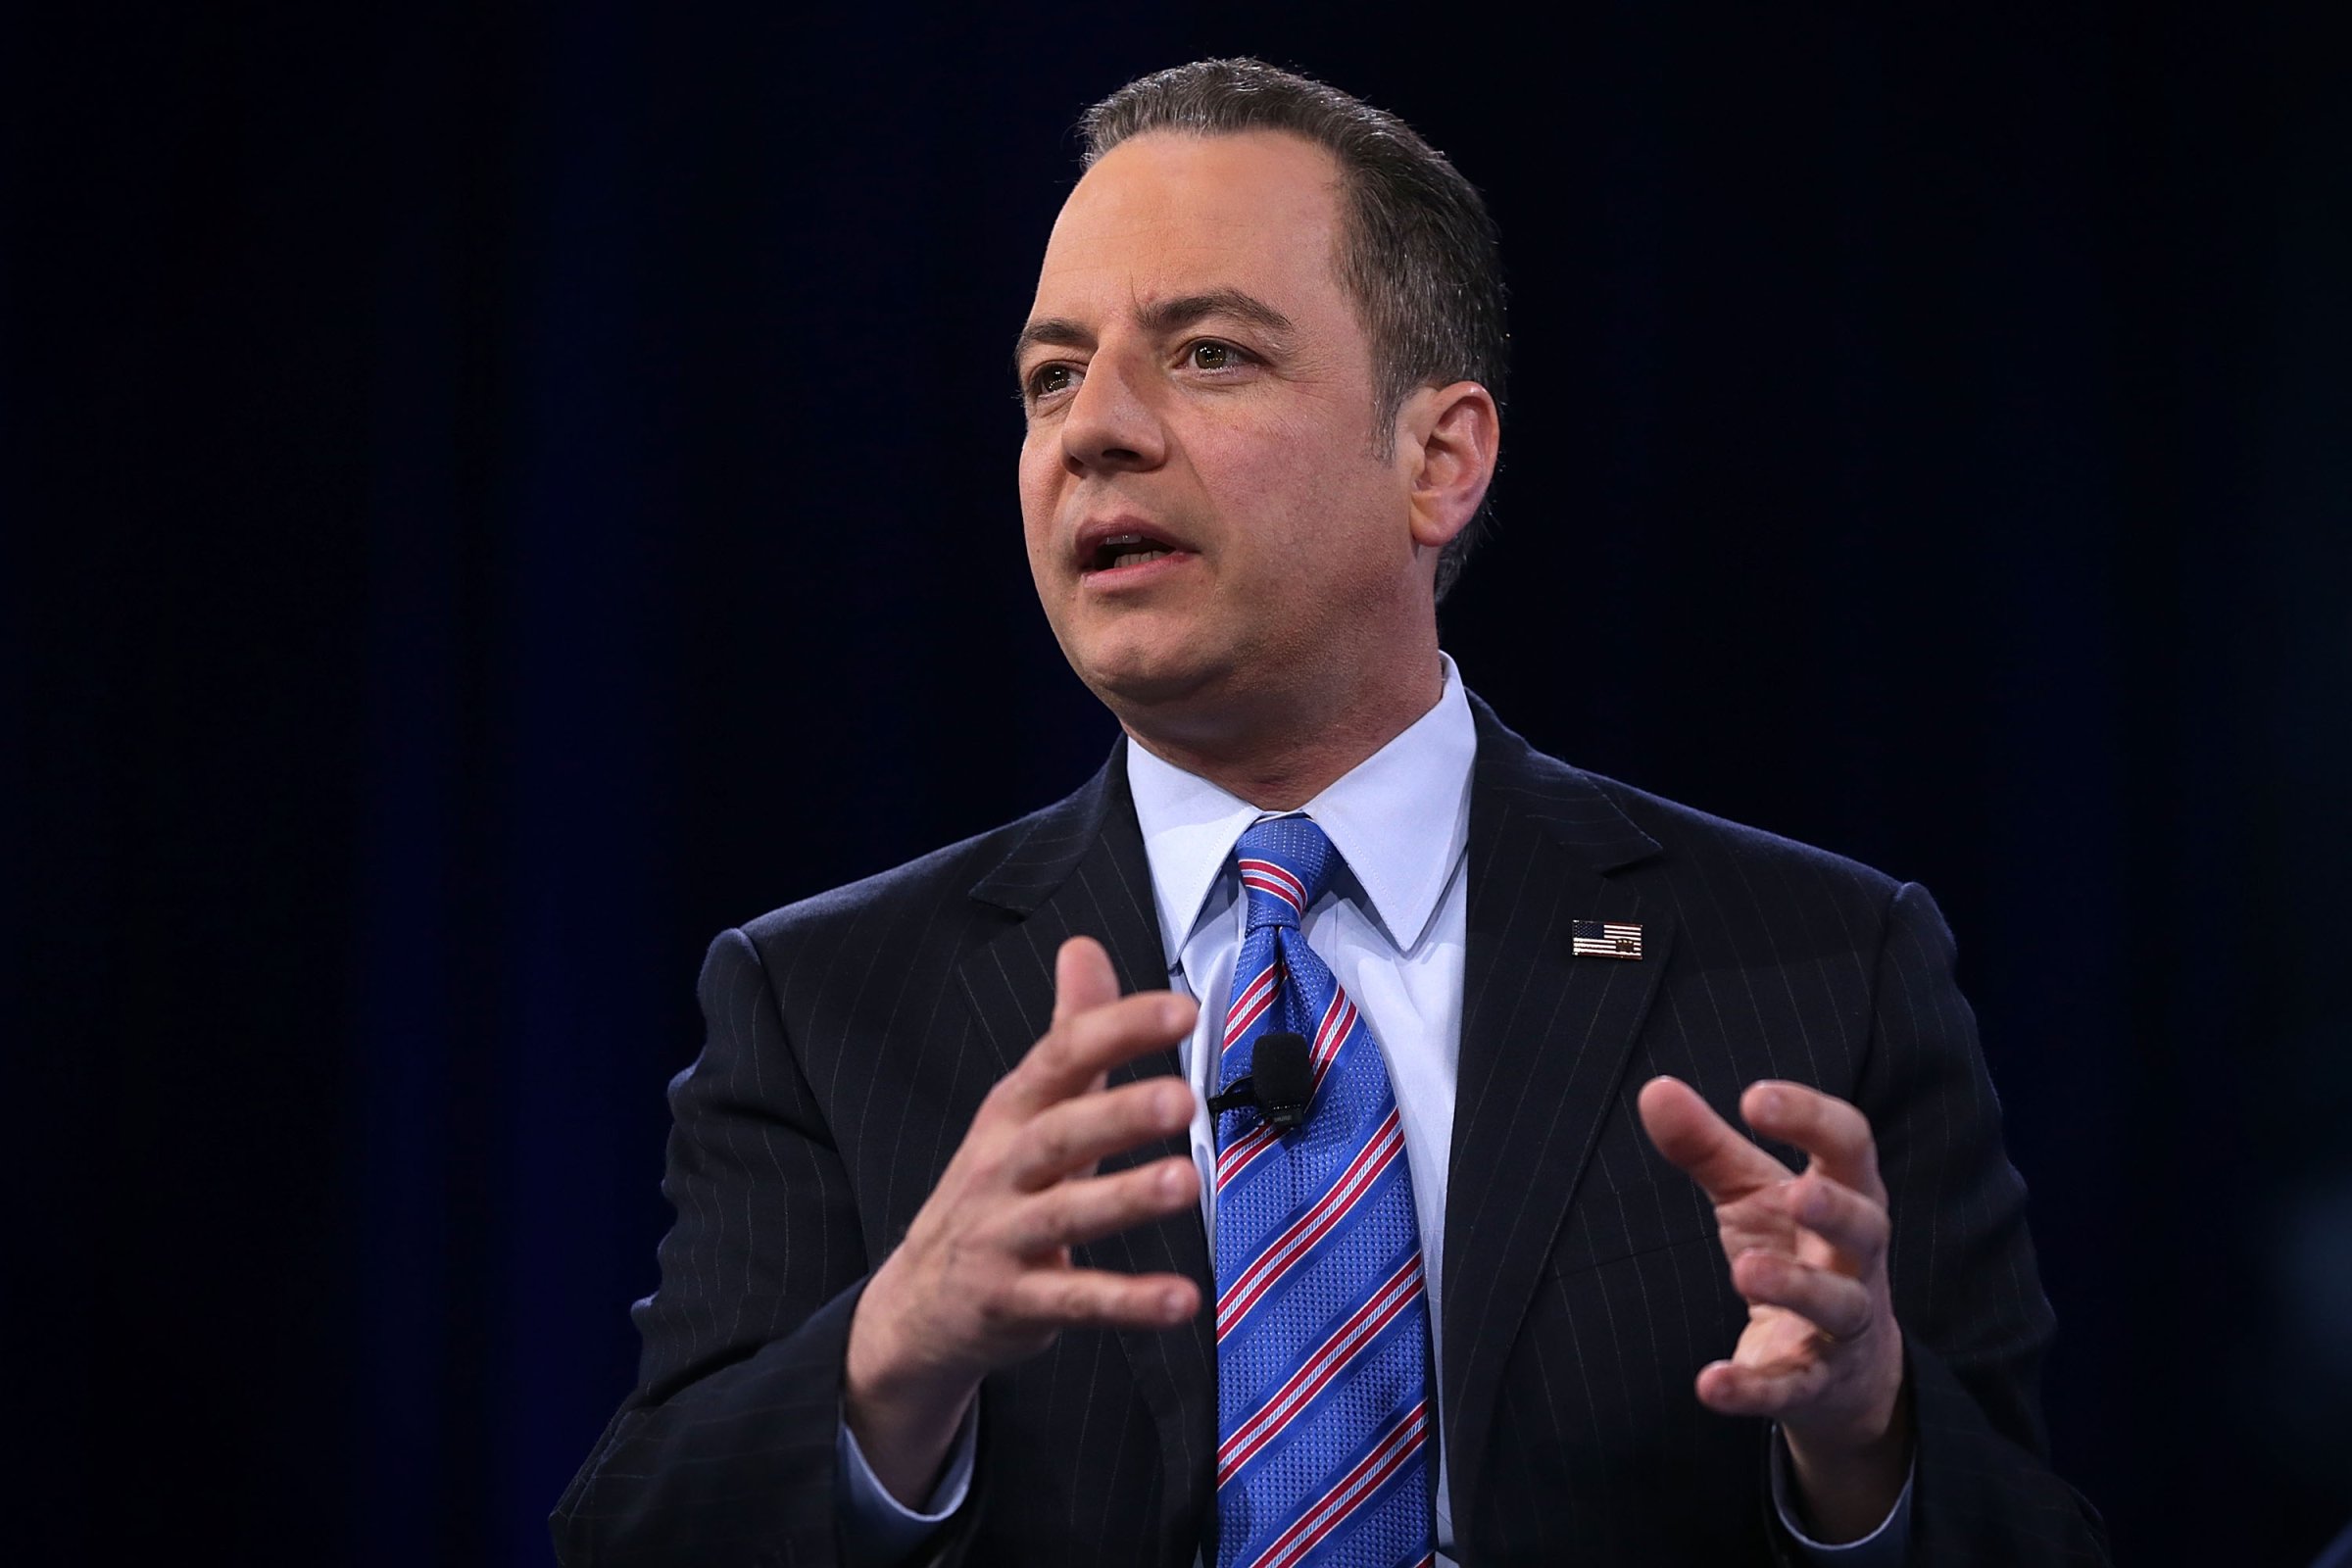 Chairman of the Republican National Committee Reince Priebus on March 4, 2016 in National Harbor, Md.